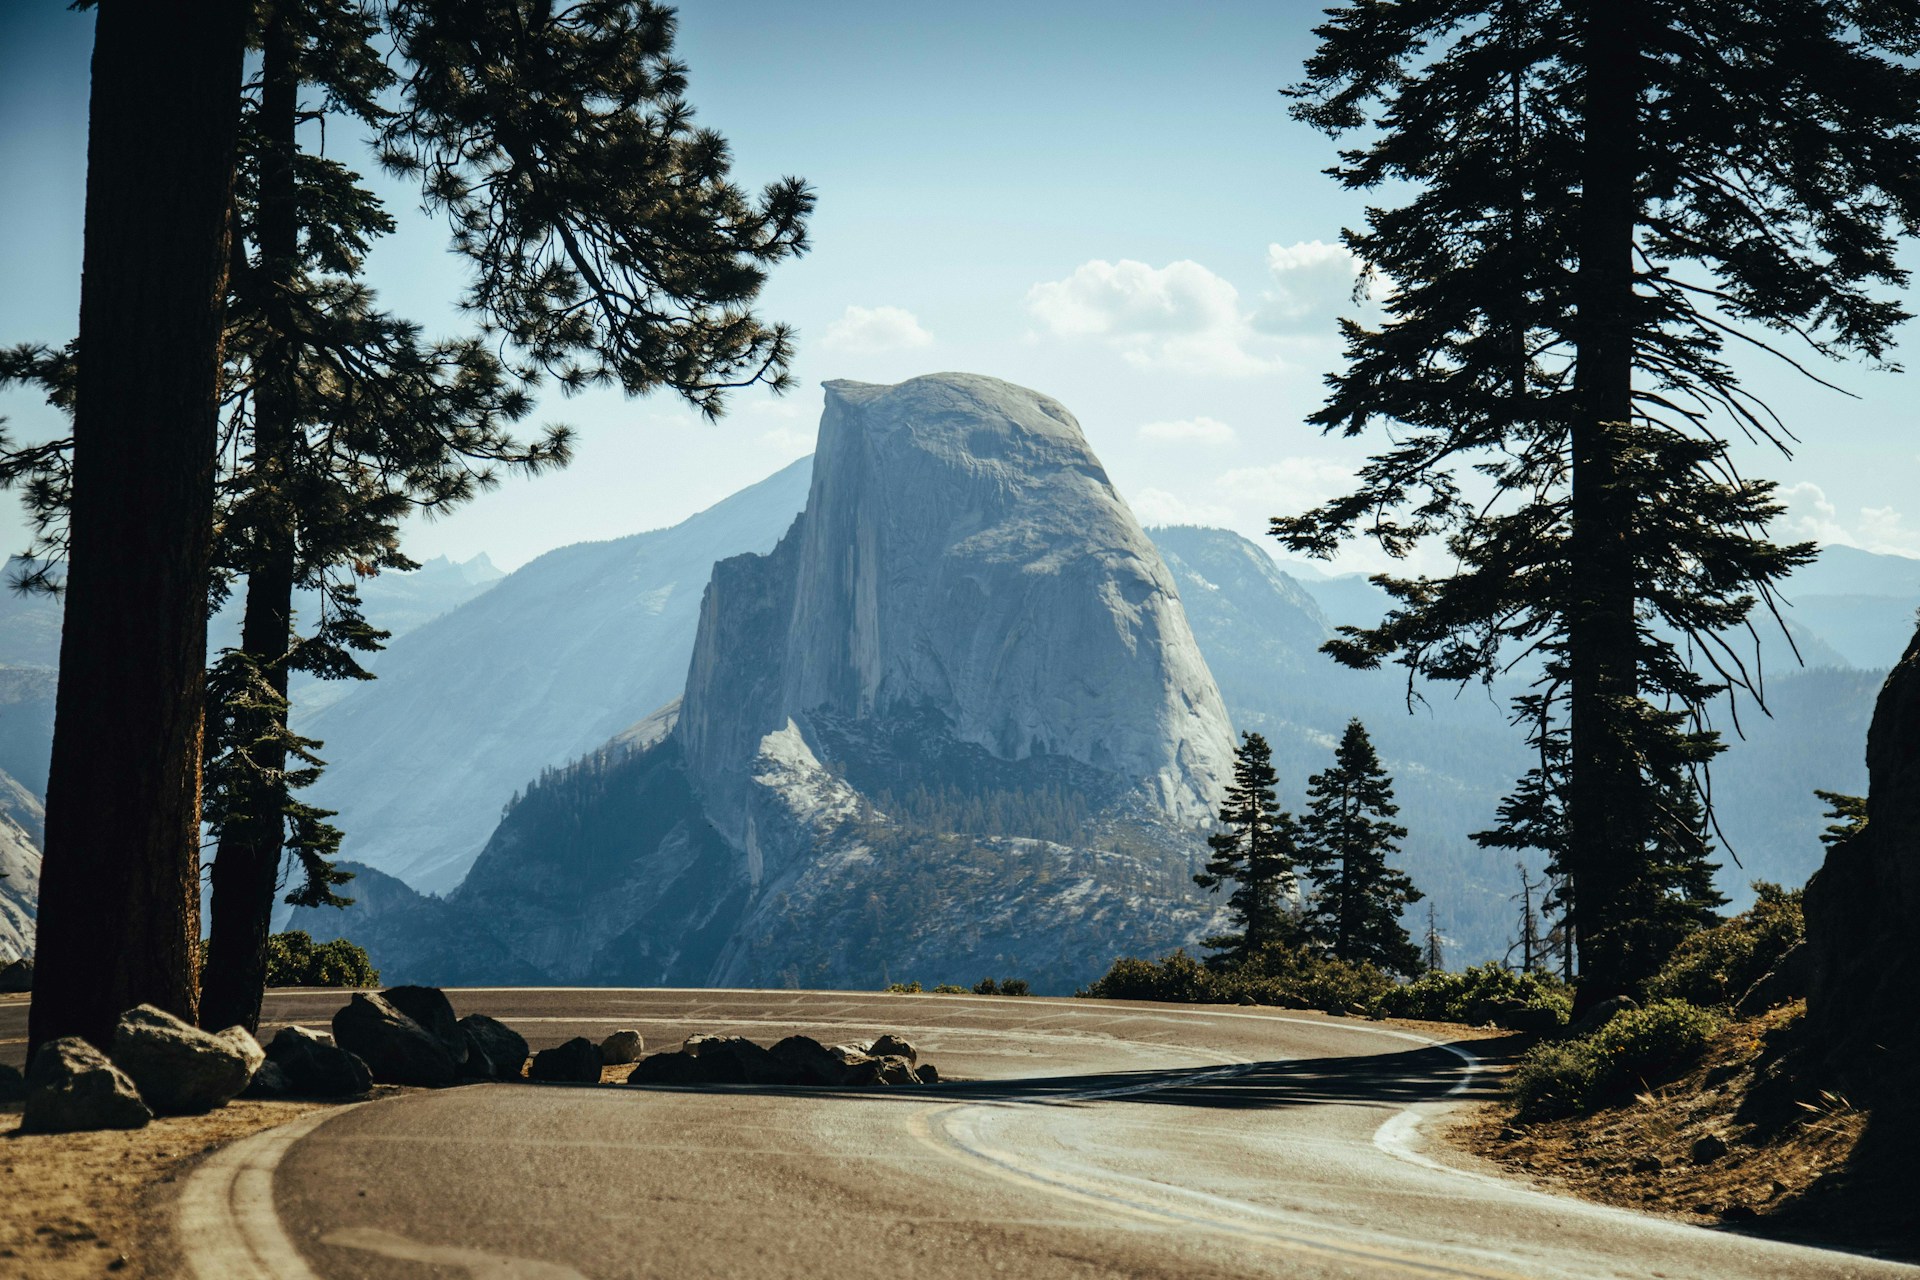 Exploring Yosemite: A Challenge for Your Park Knowledge